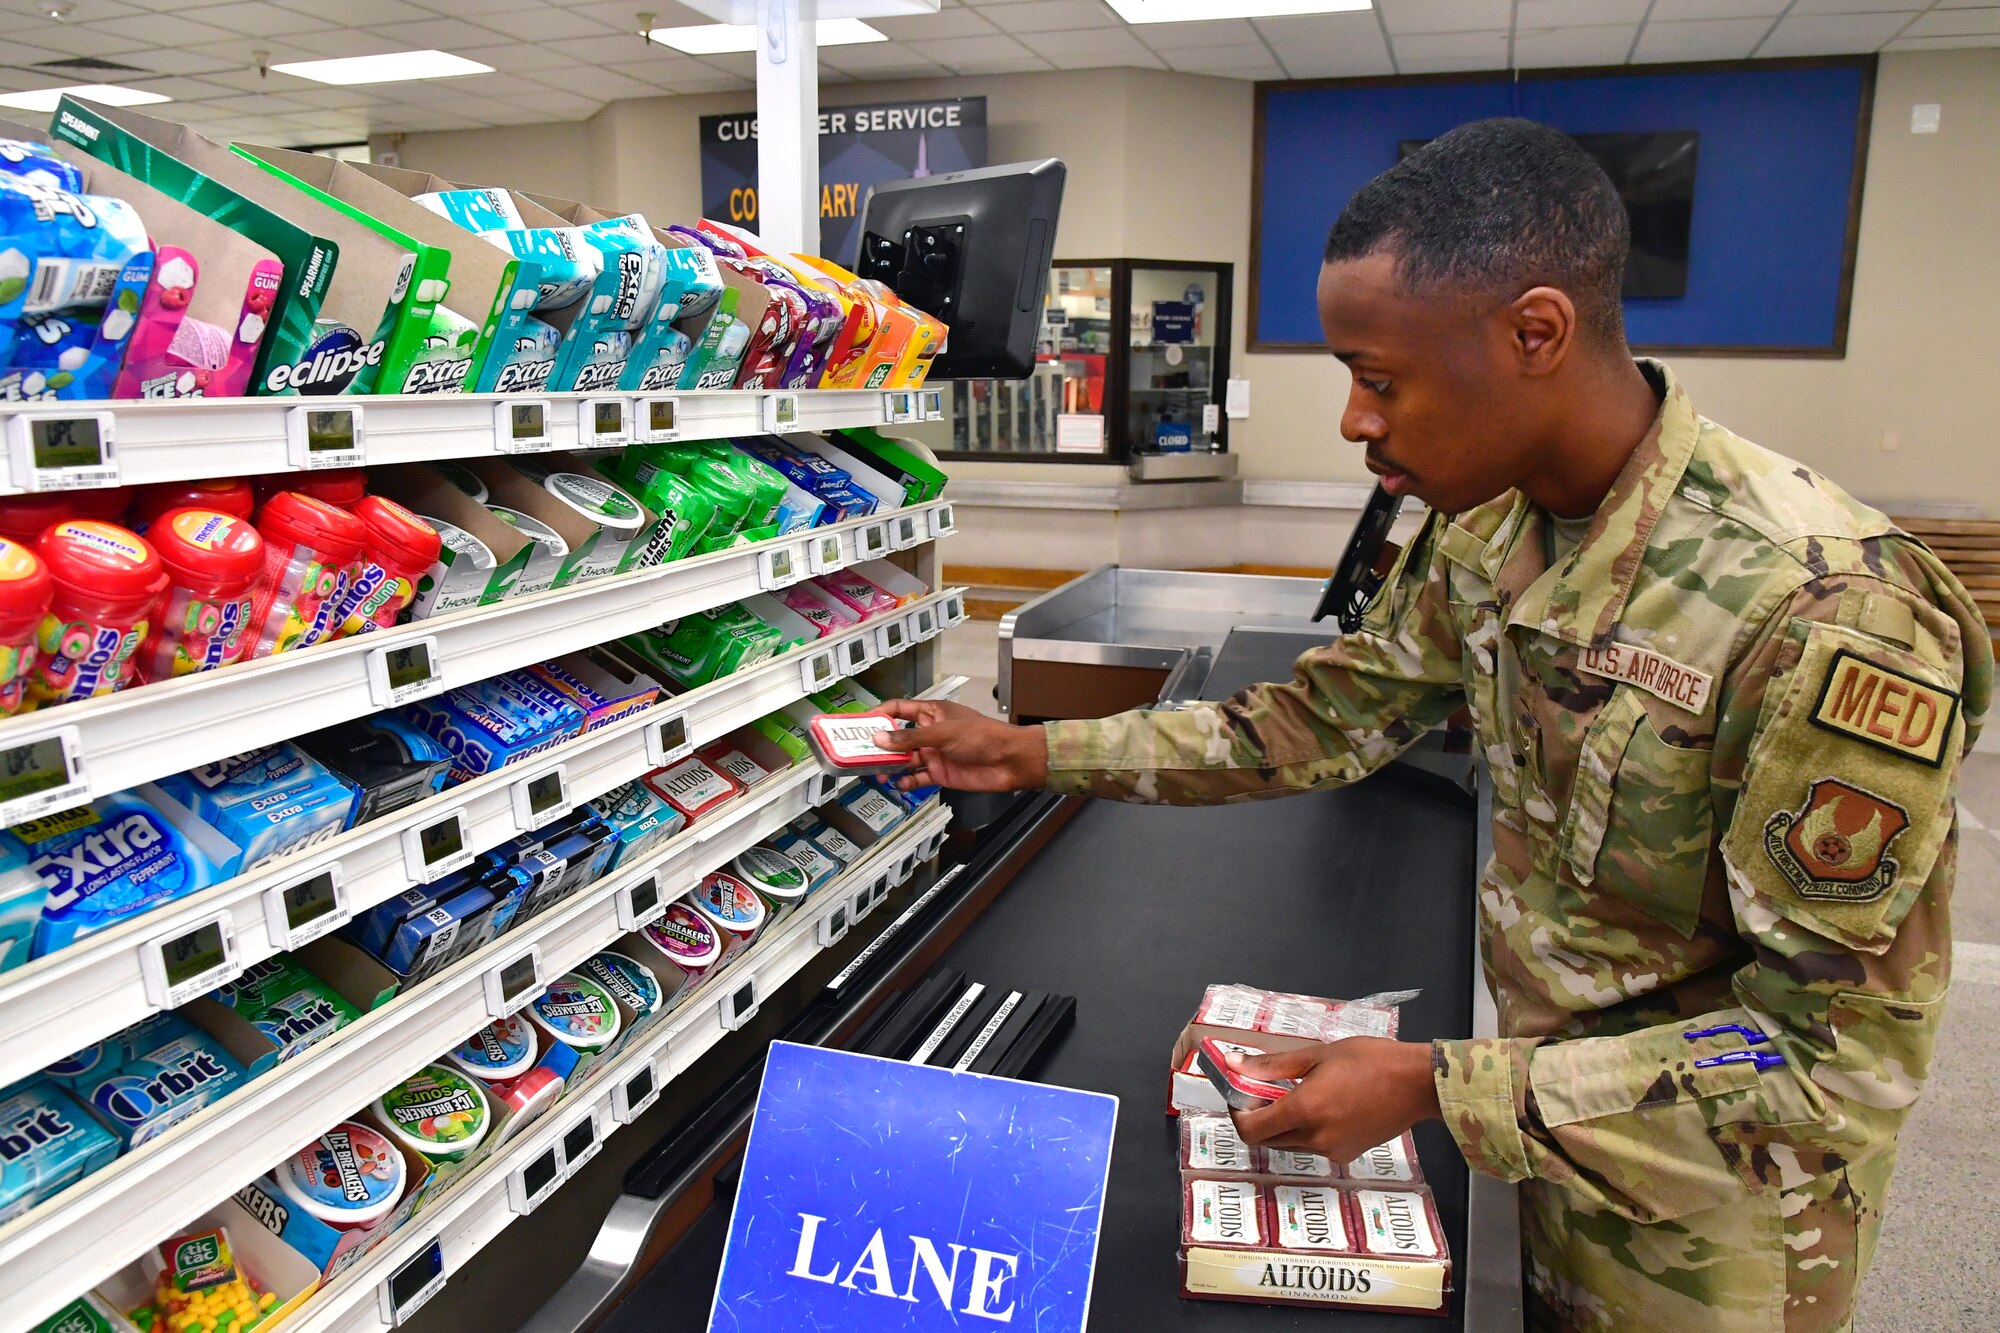 Airman 1st Class Miles Lee, 75th Operational Readiness Medical Squadron, stocks shelves at the base Commissary July 26, 2022, at Hill Air Force Base, Utah. Organized by the Air Force Sergeants Associations Chapter 1163, Airmen from across the installation have been volunteering to restock shelves at the store. (U.S. Air Force photo by Todd Cromar)